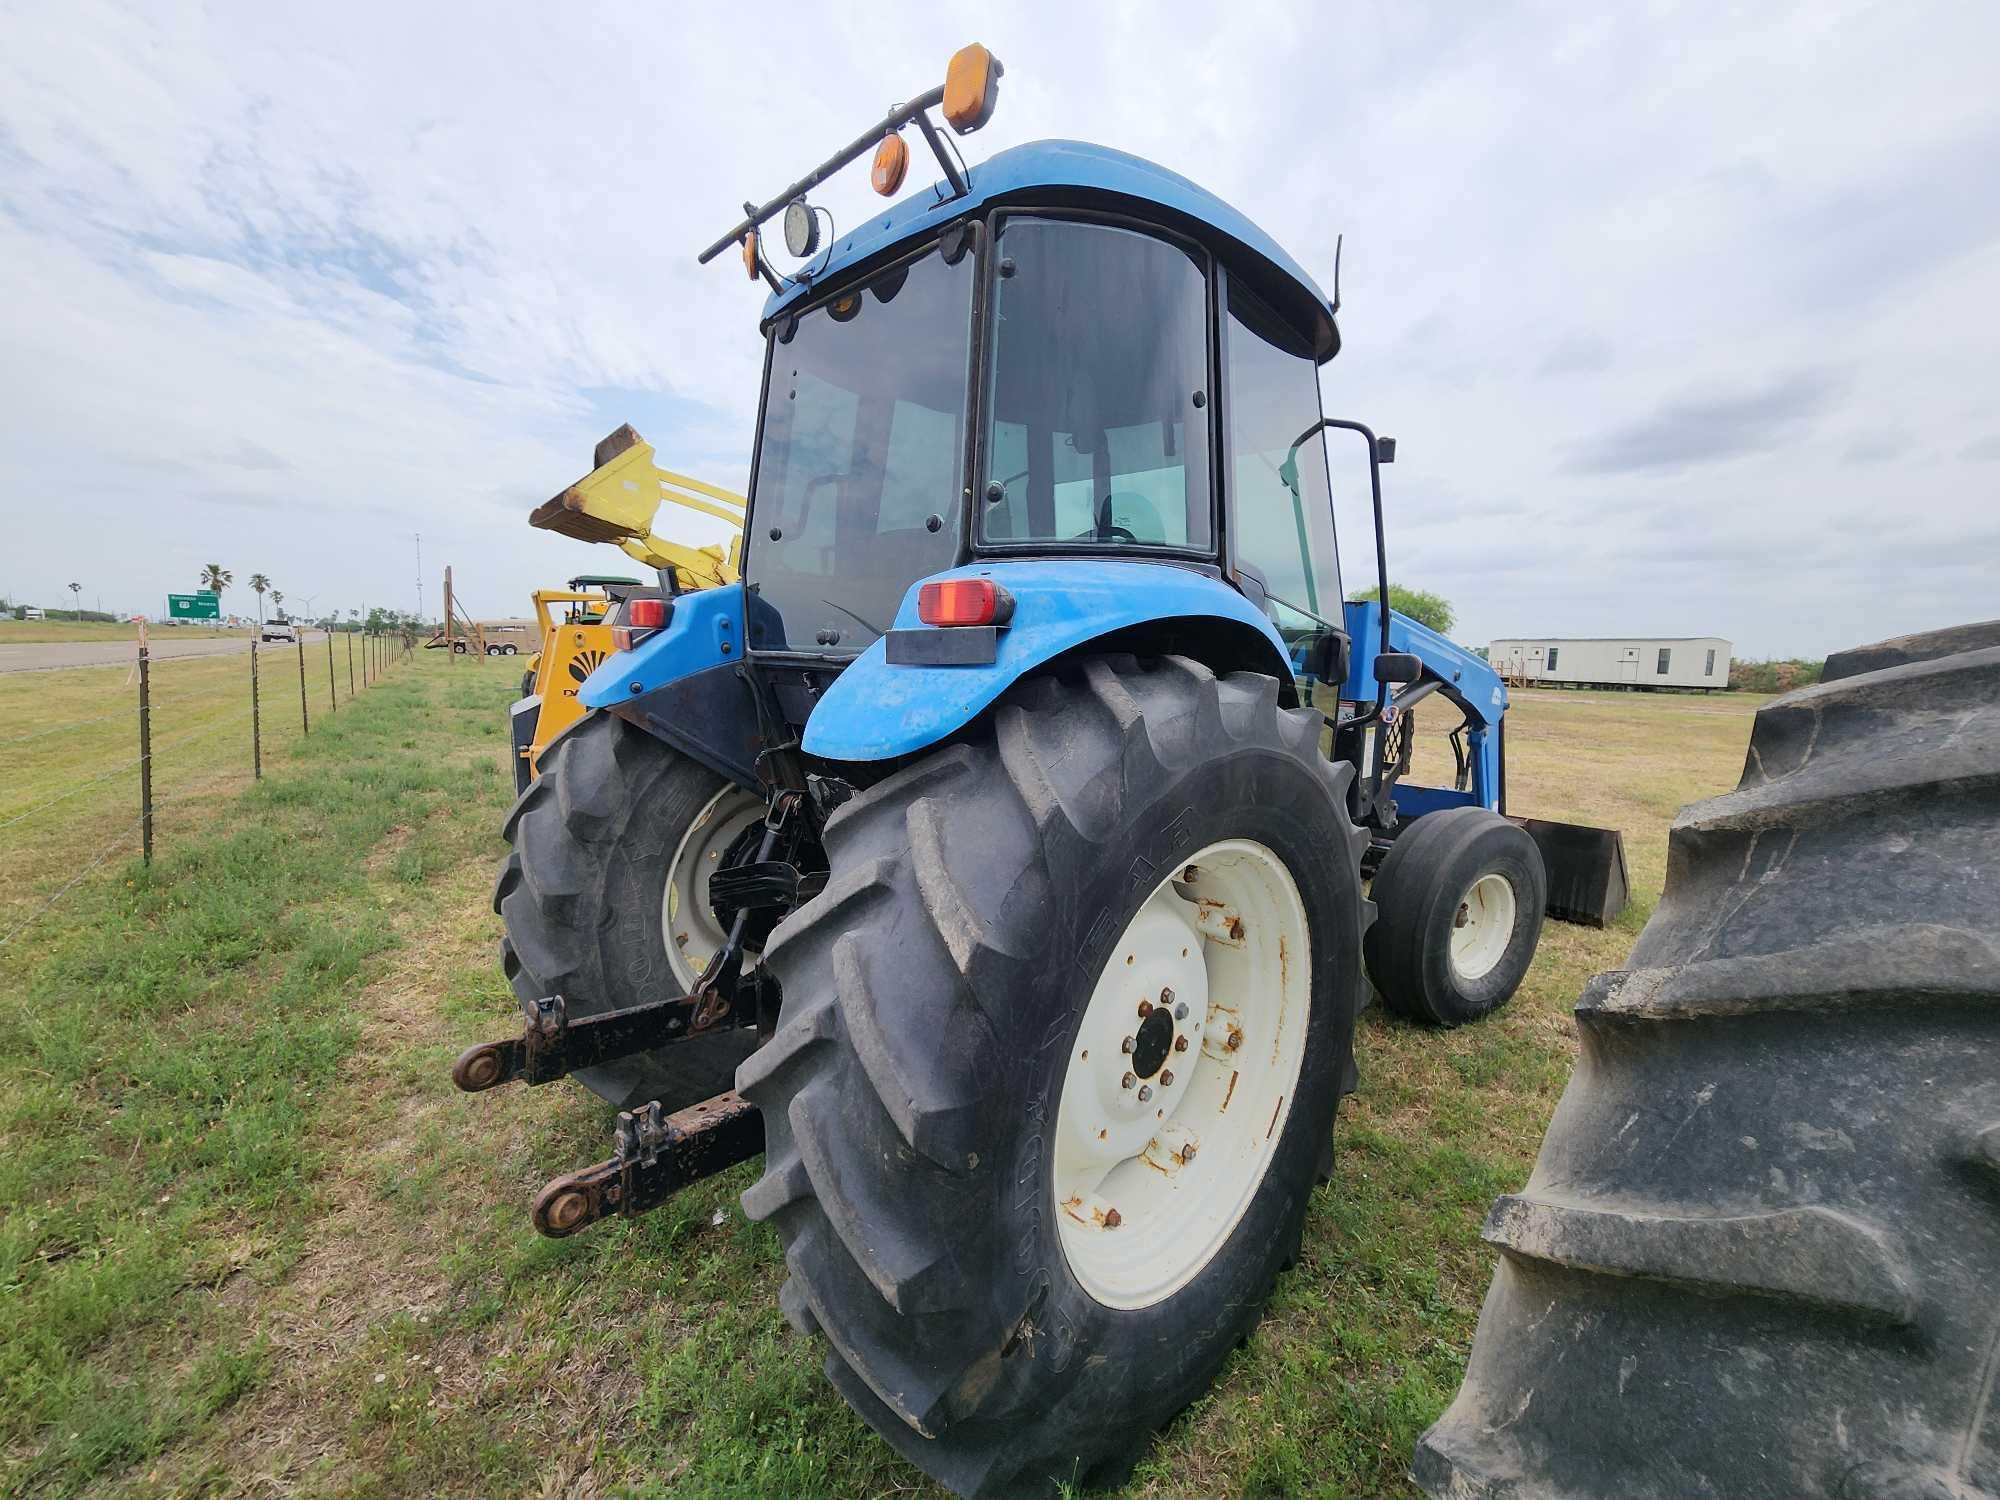 New Holland TD95D Tractor